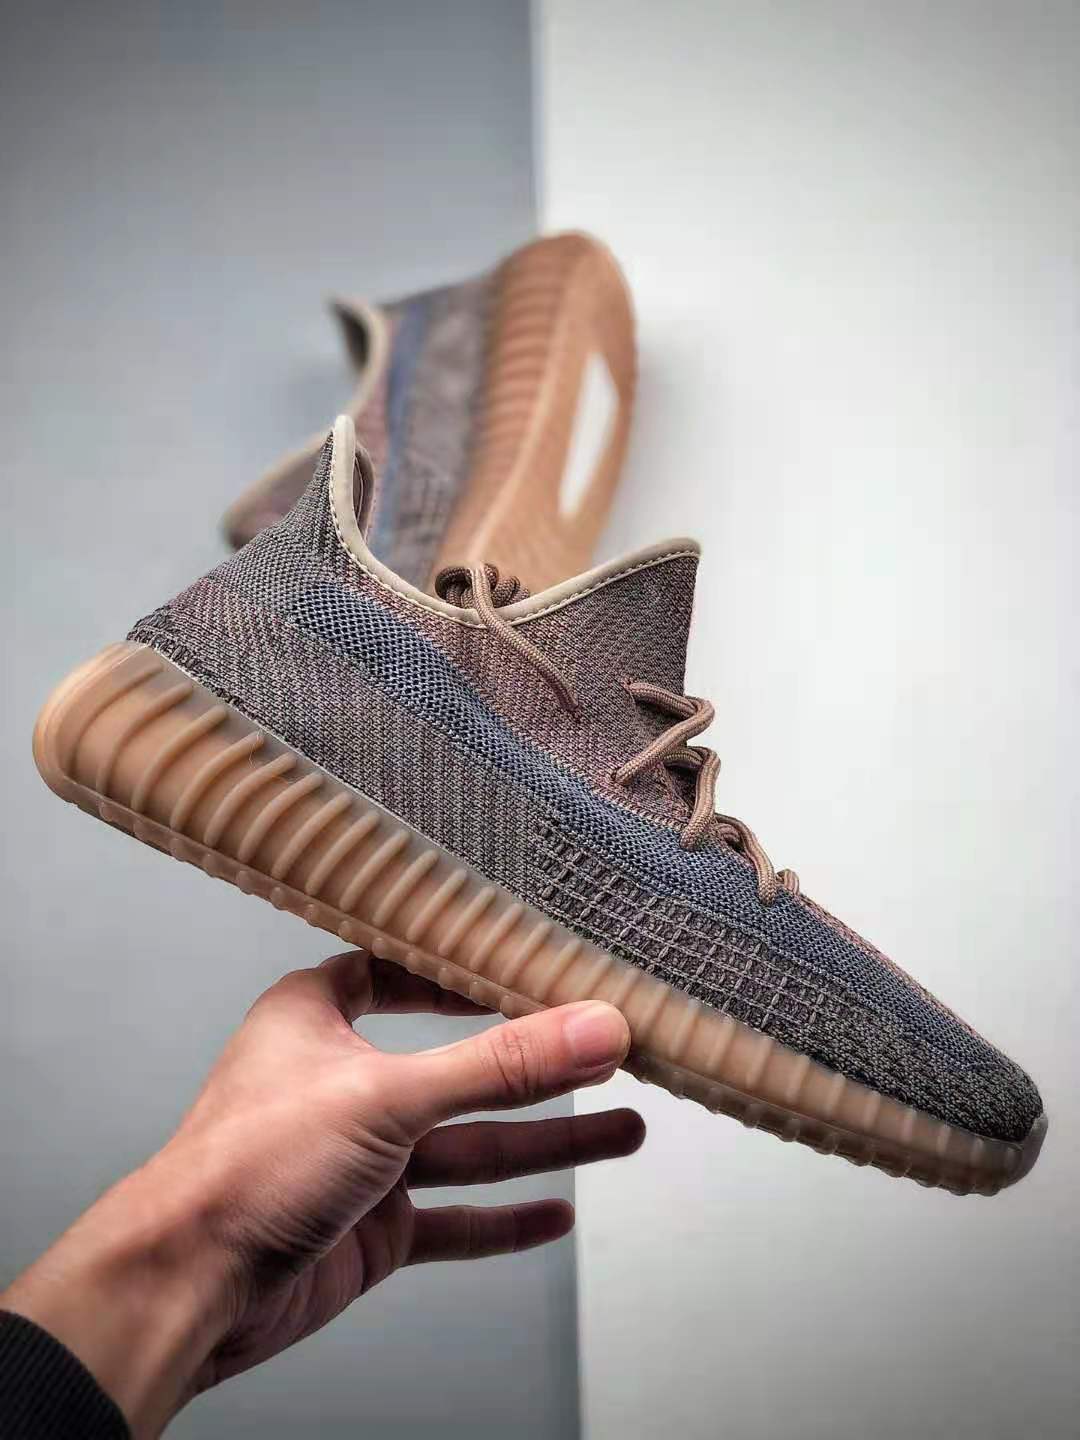 Adidas Yeezy Boost 350 V2 'Fade' H02795 - Exquisite Design & Unmatched Comfort